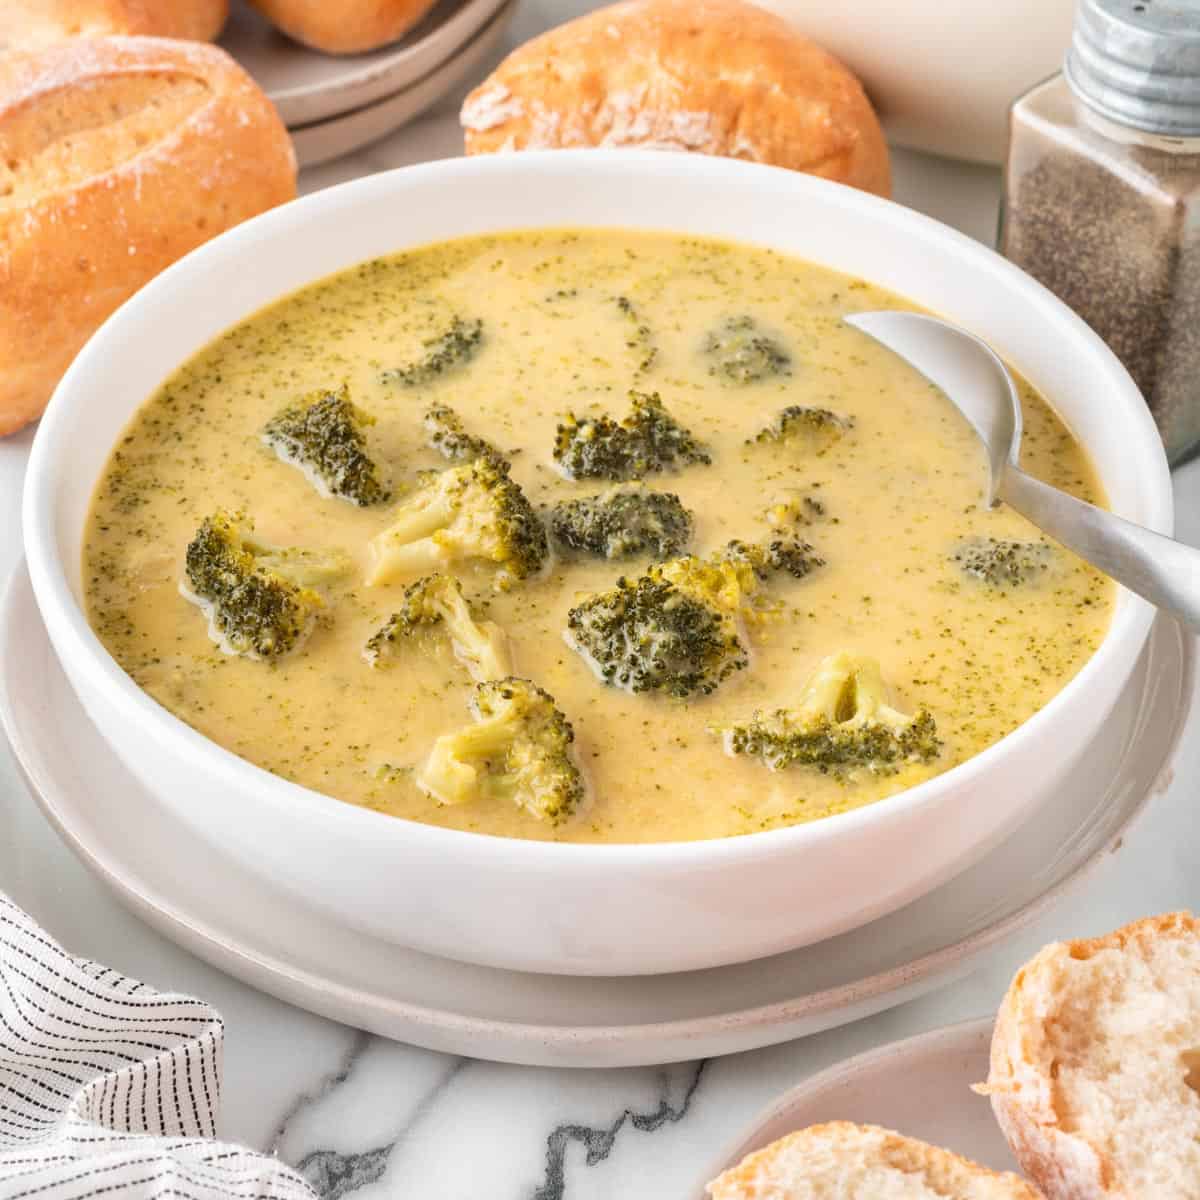 A photo of cheesy broccoli soup in a white bowl with a spoon.